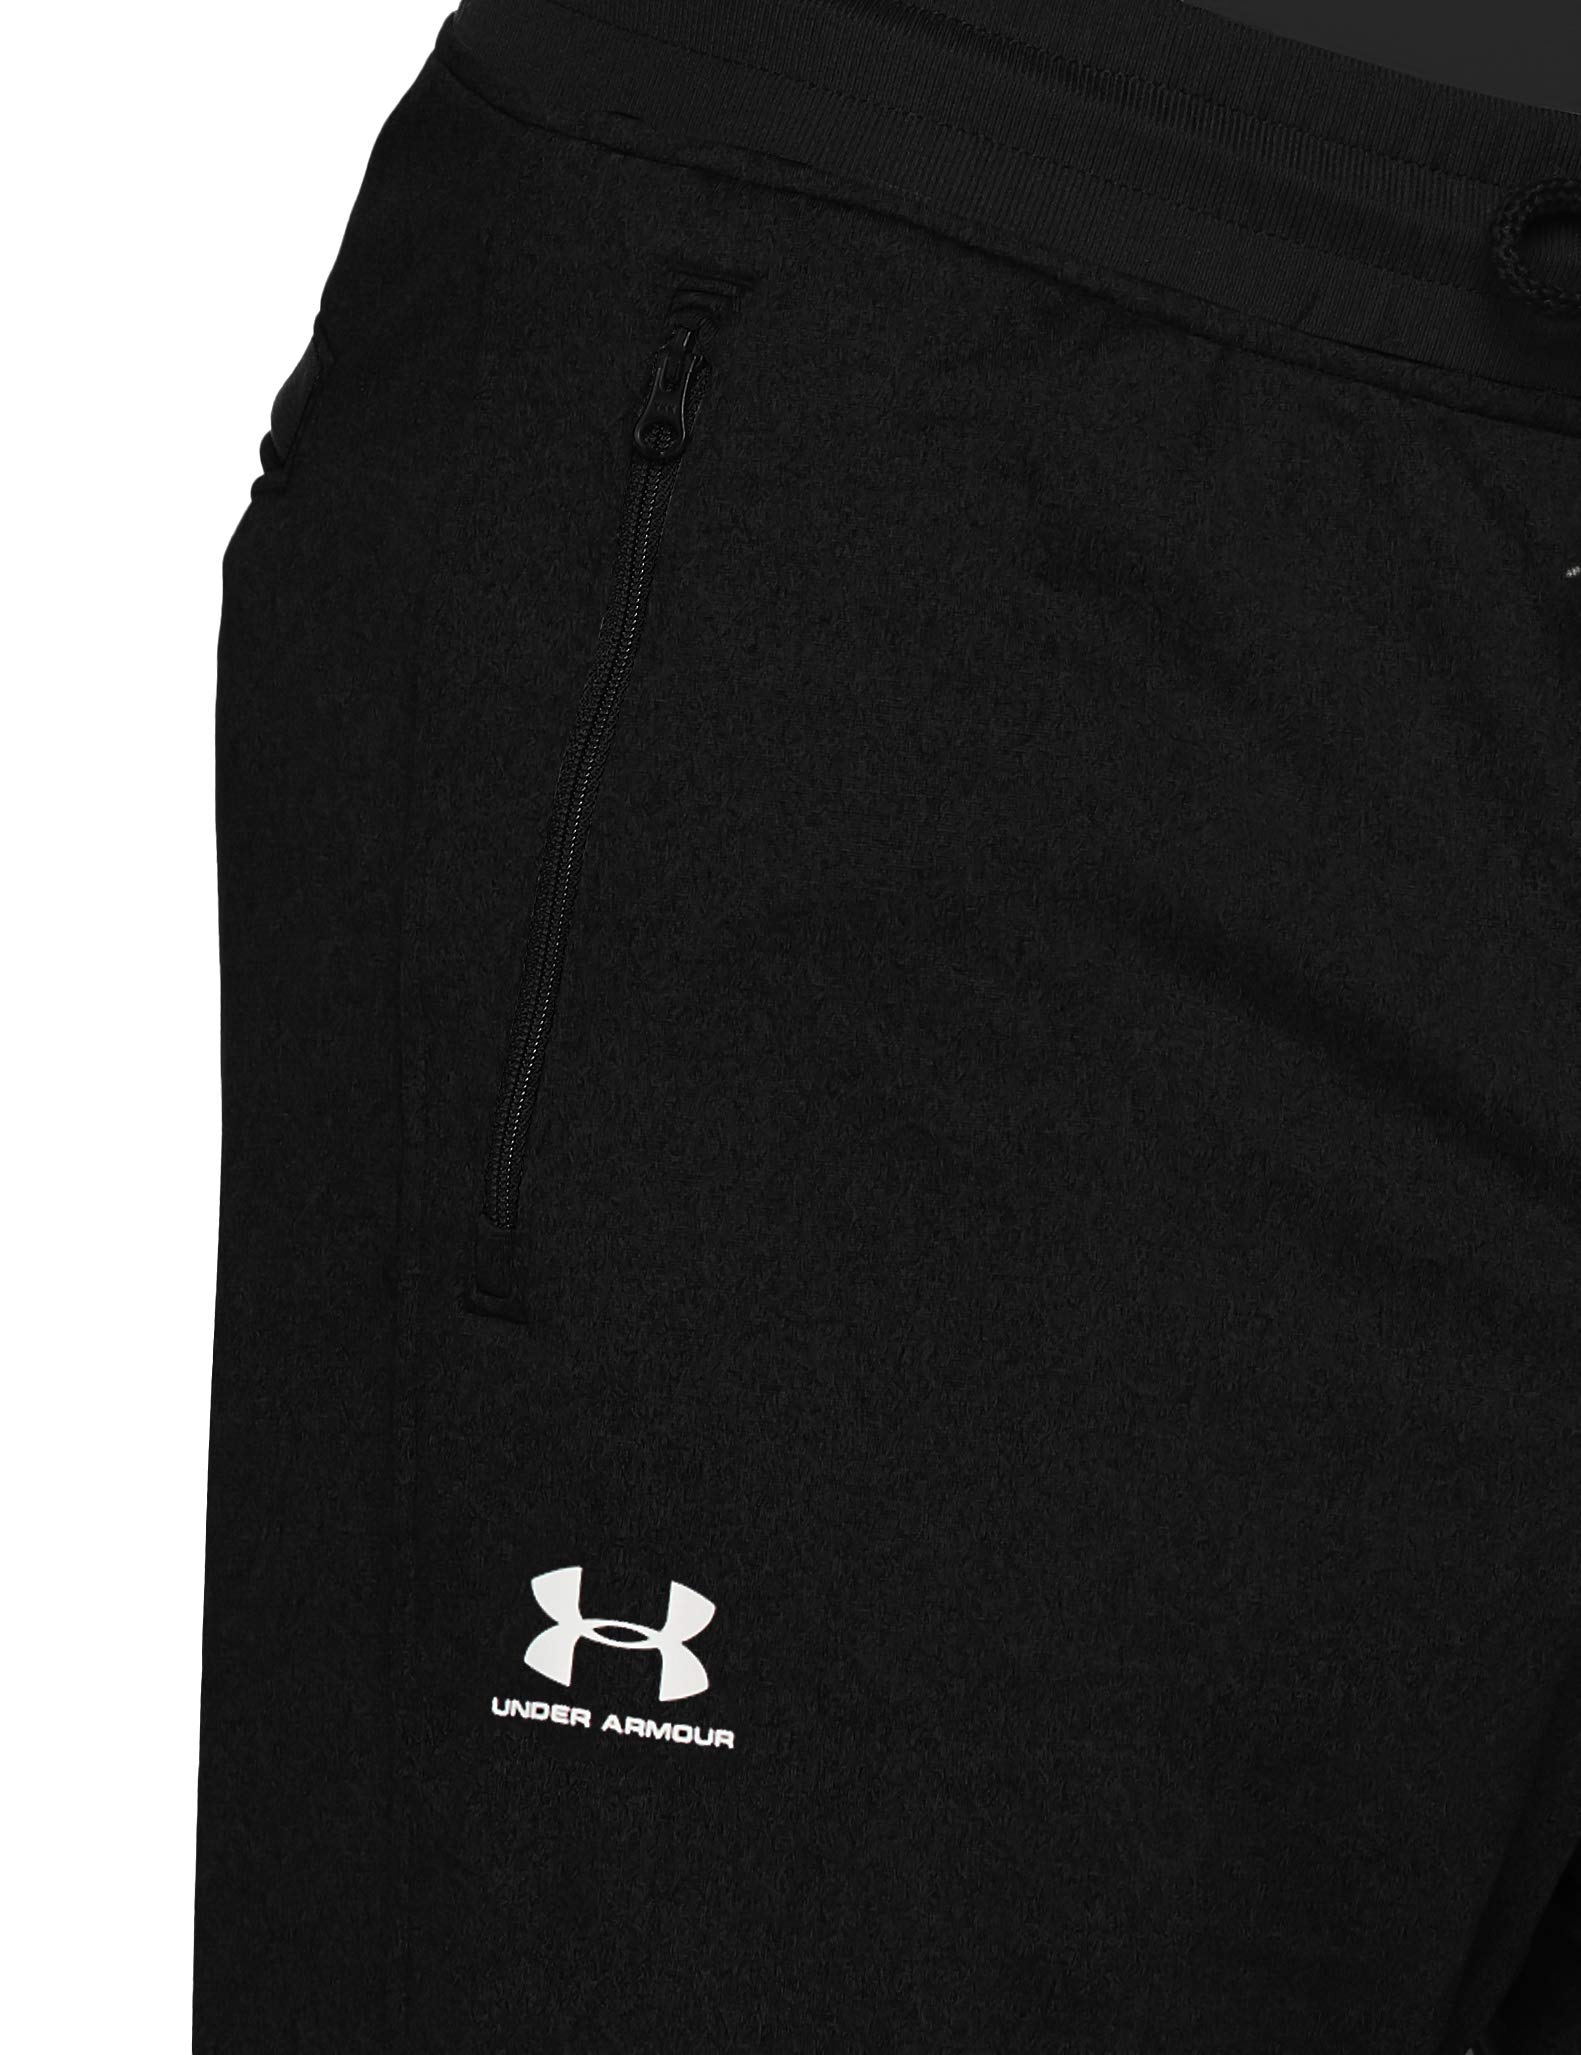 Under Armour Men's Sportstyle Tricot Joggers